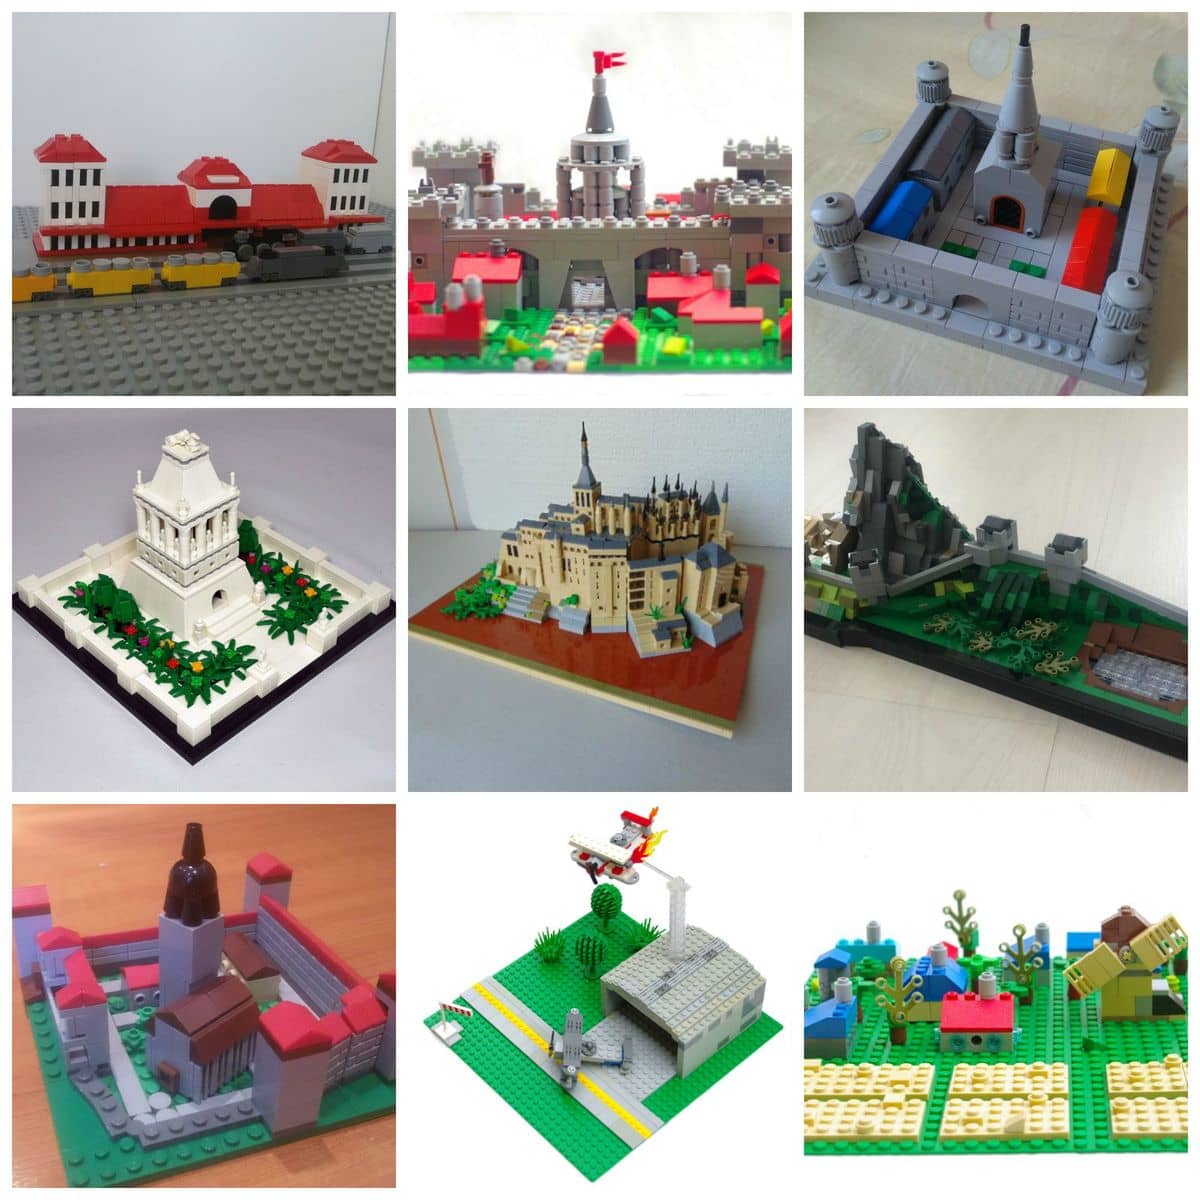 Concurs Microscale Old City – Clasament final